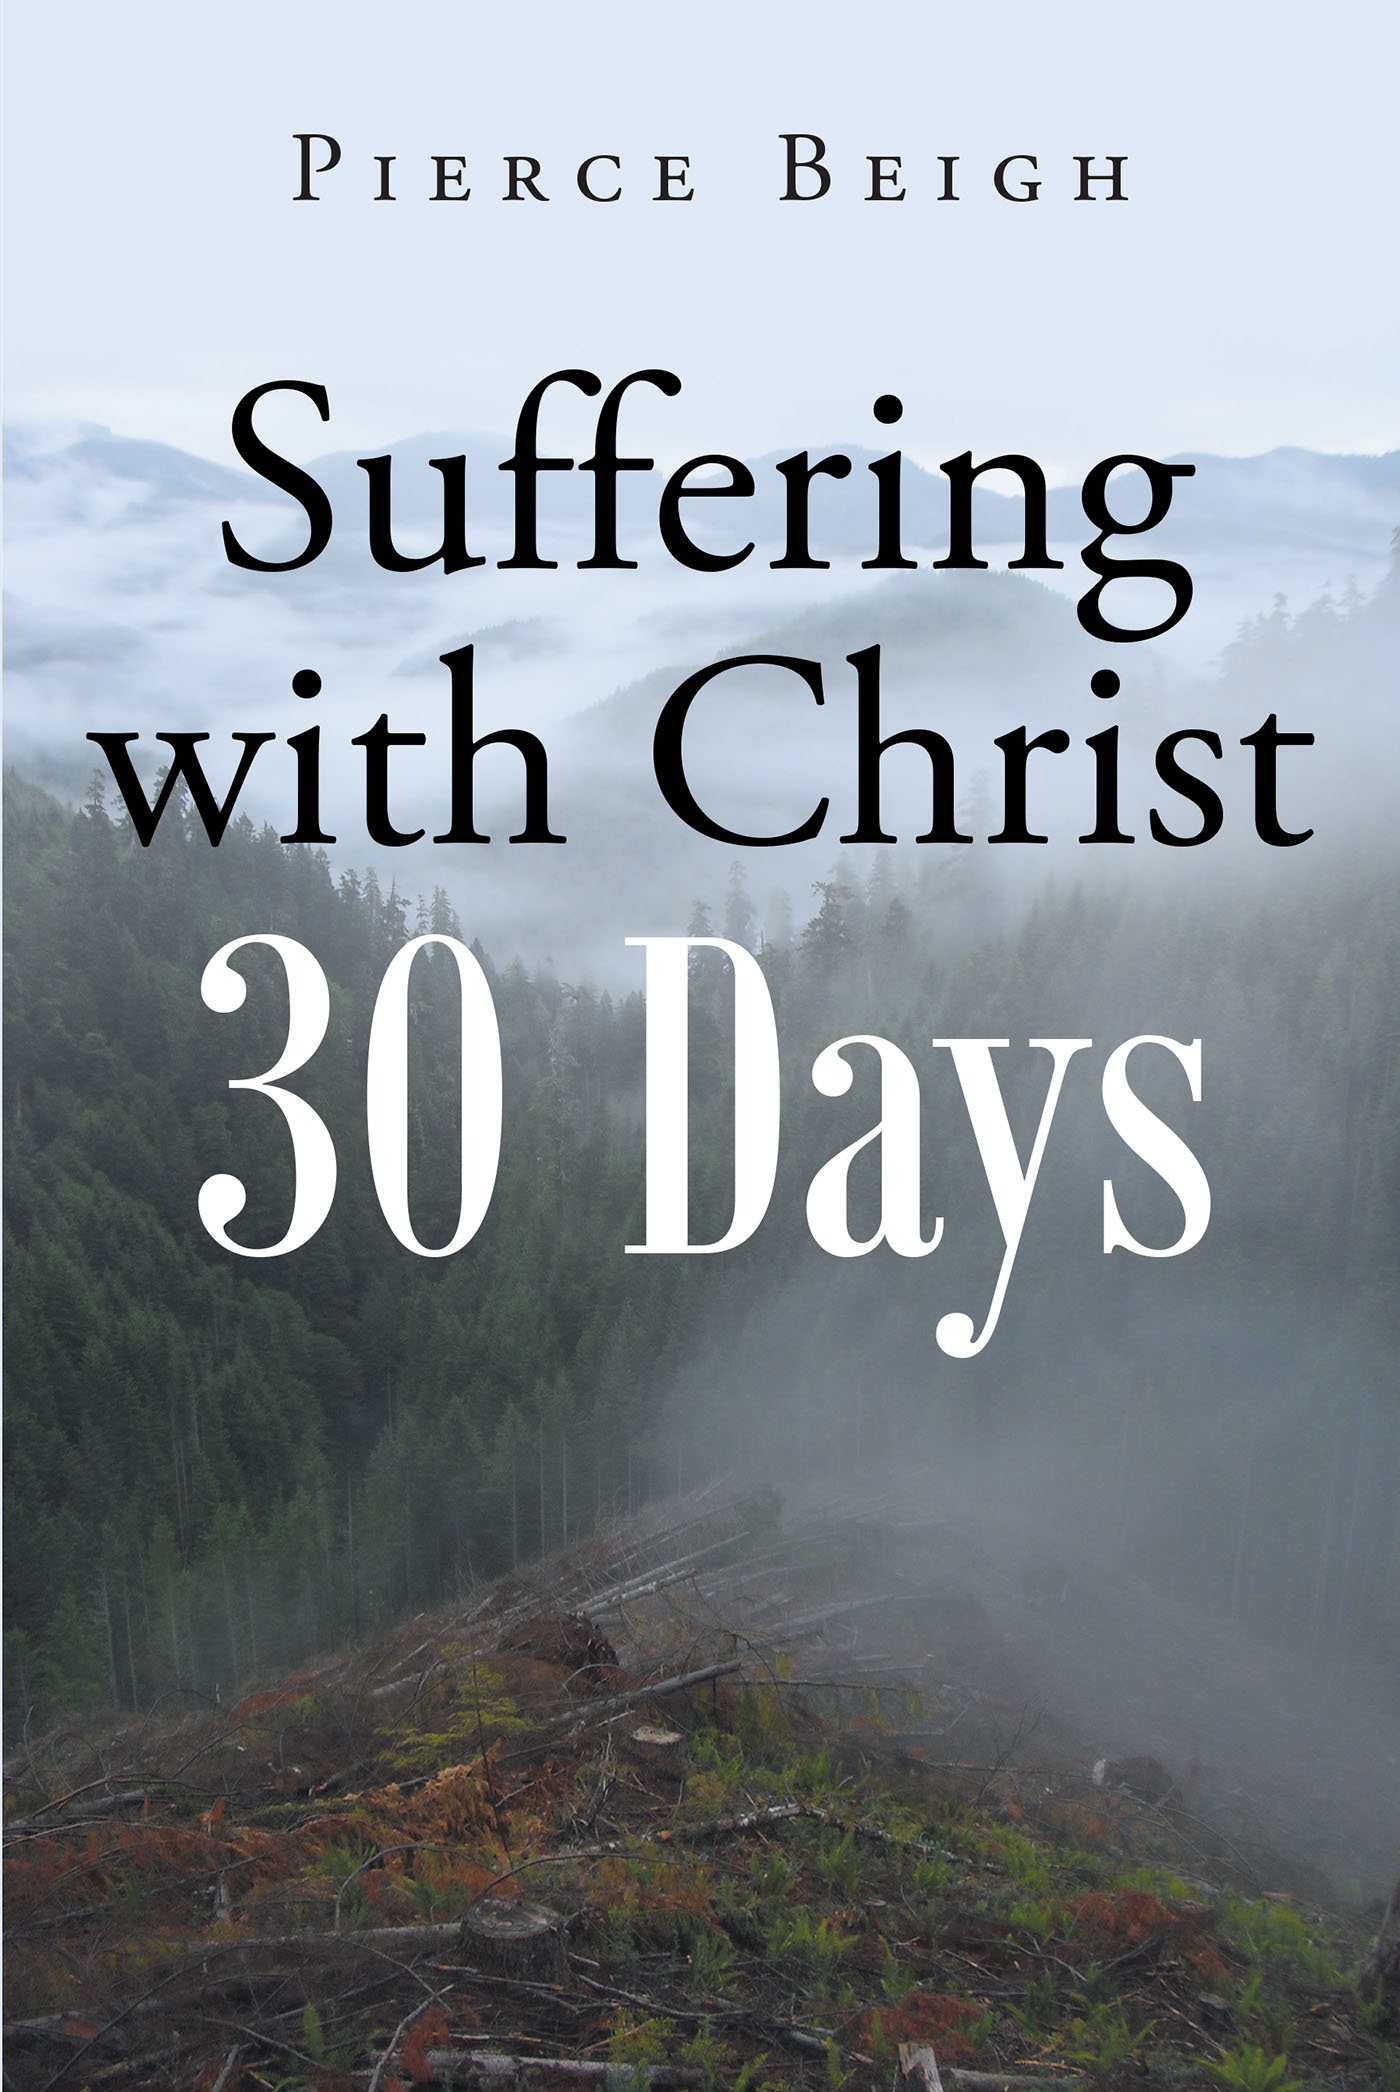 Pierce Beigh’s Newly Released "Suffering with Christ: 30 Days" is an Encouraging Collection of Thoughtful Devotions for Anyone Facing Tribulations